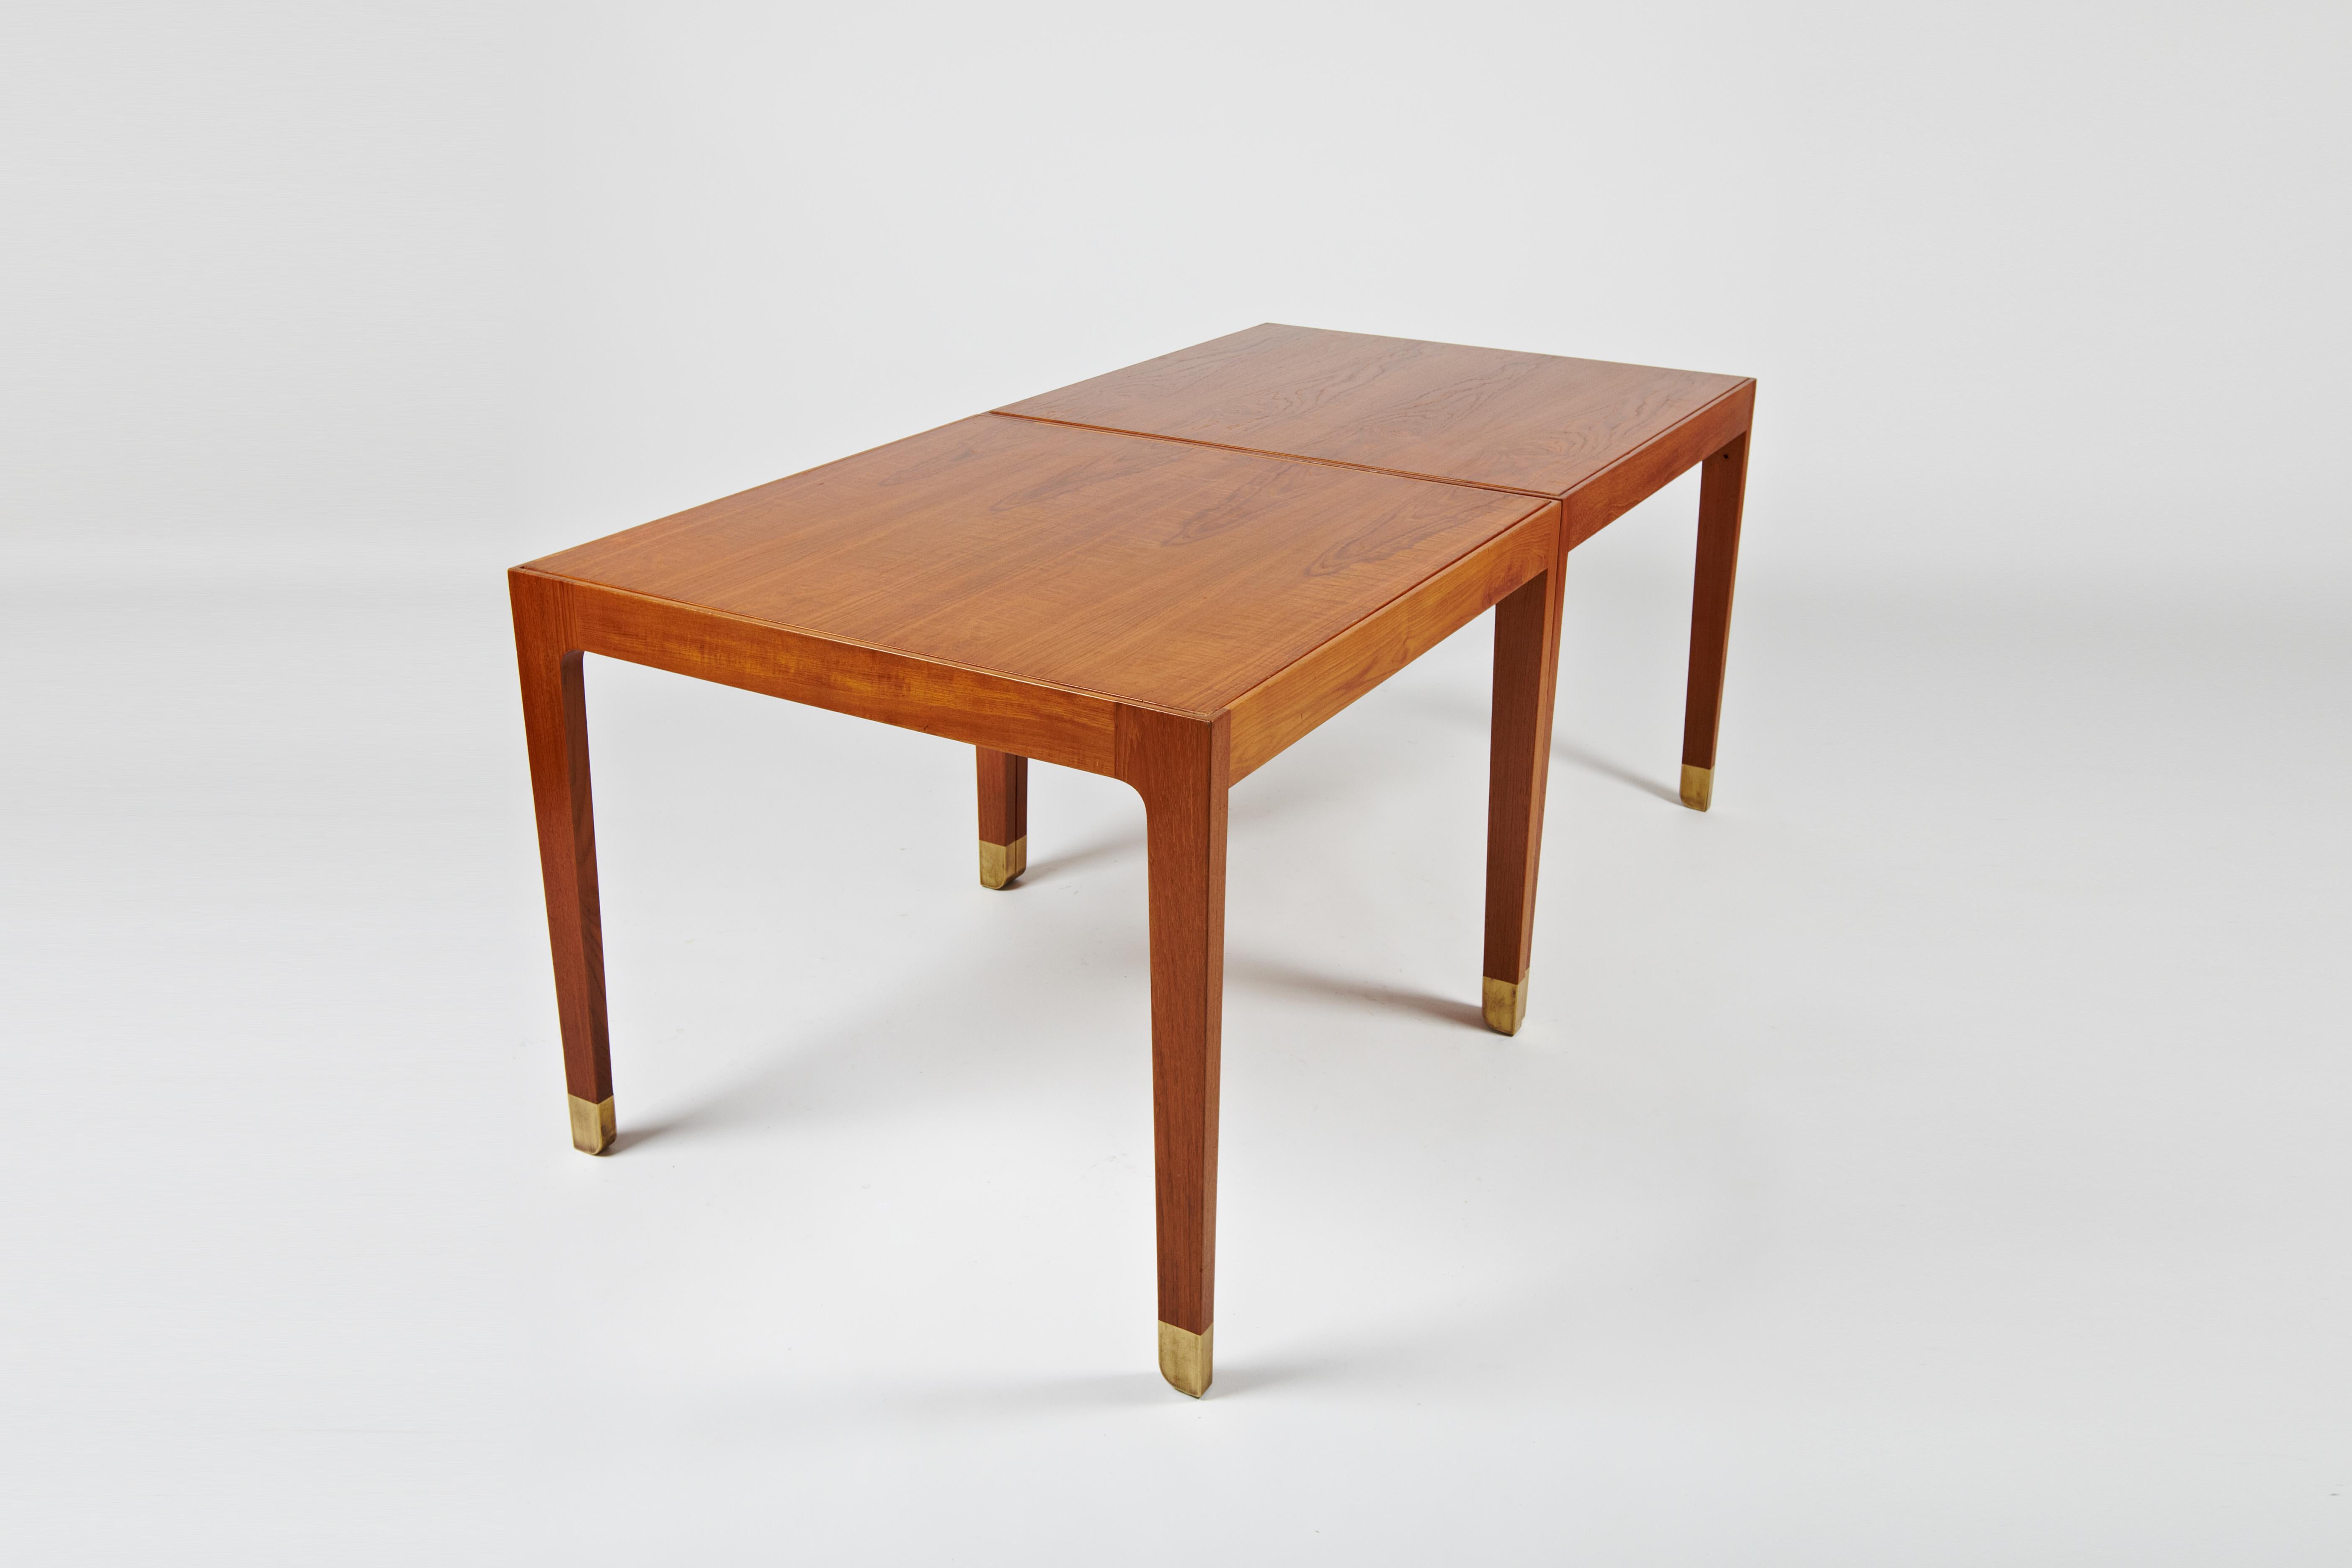 Scandinavian Modern Finn Juhl: Pair of exhibition tables made 1947 - for dining or cards For Sale